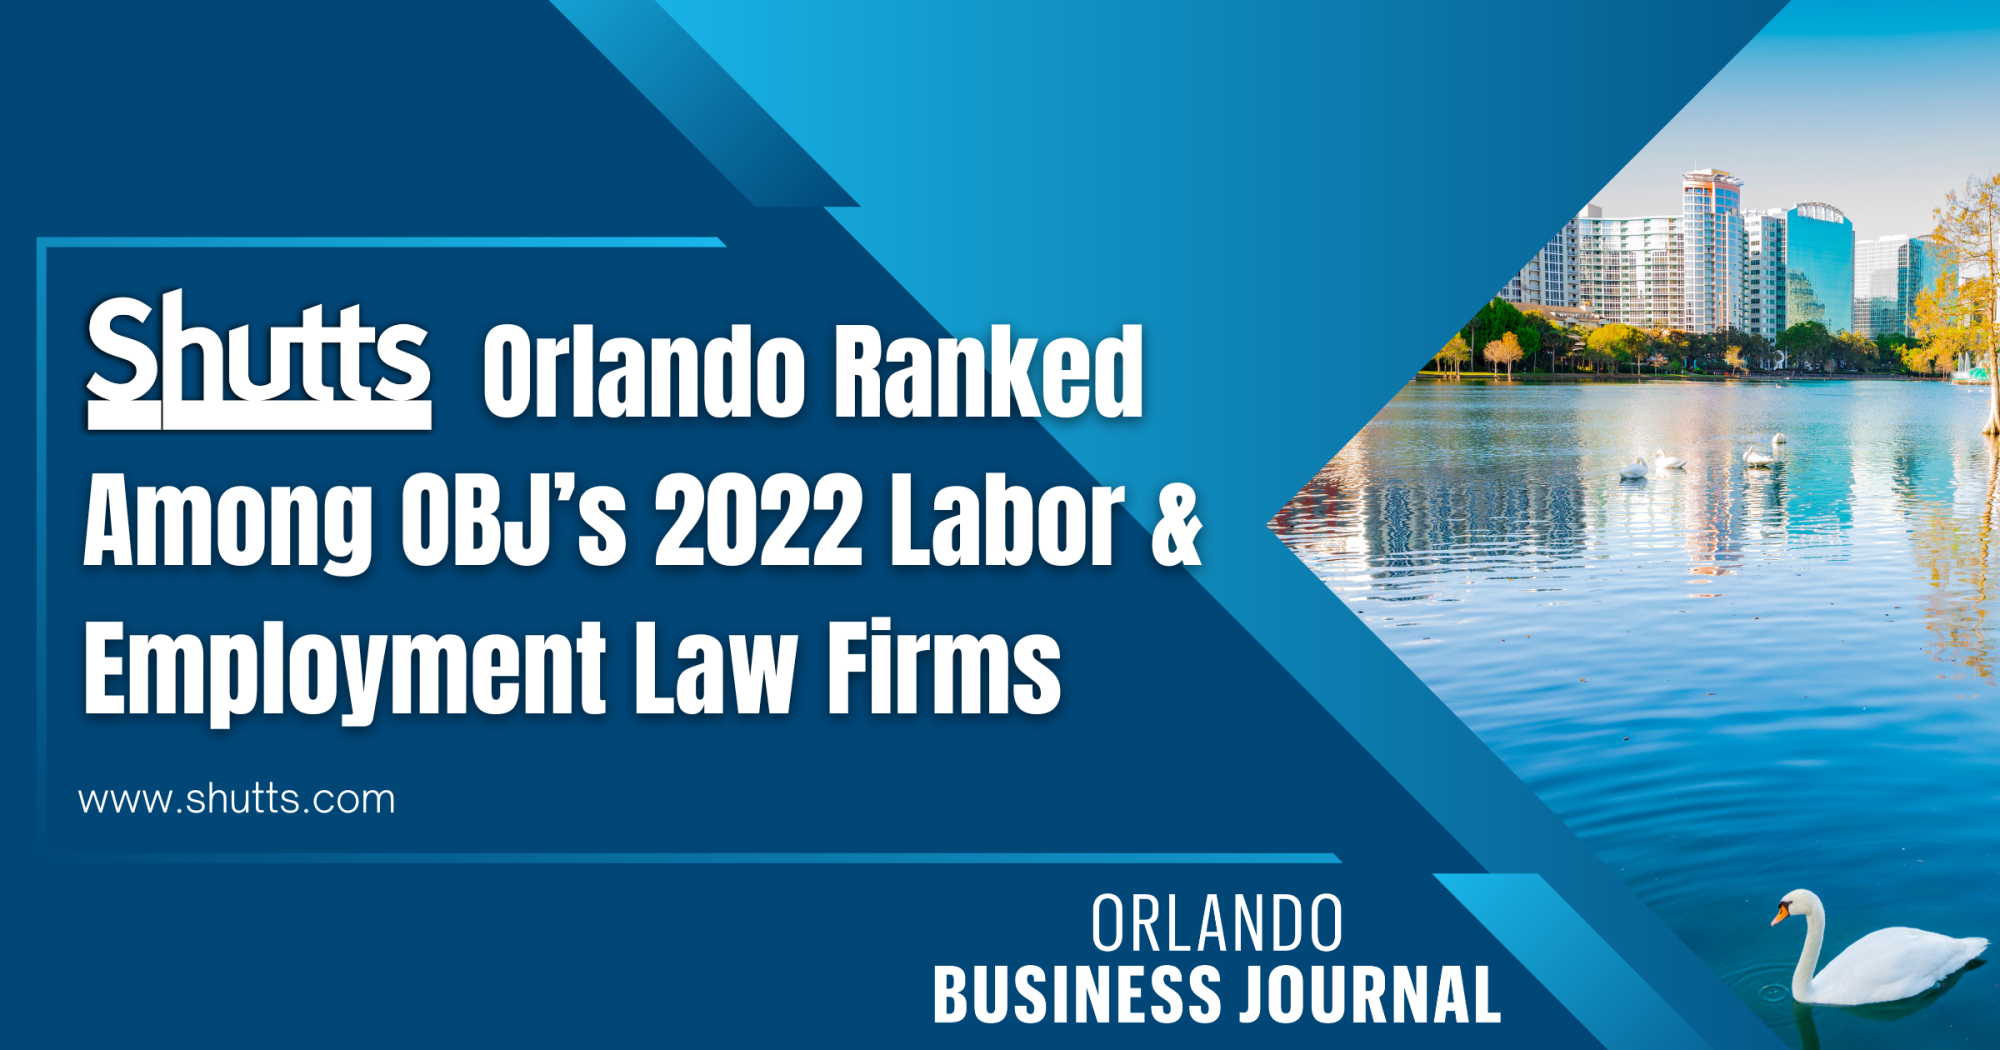 Shutts Orlando Ranked Among OBJ’s 2022 Labor & Employment Law Firms